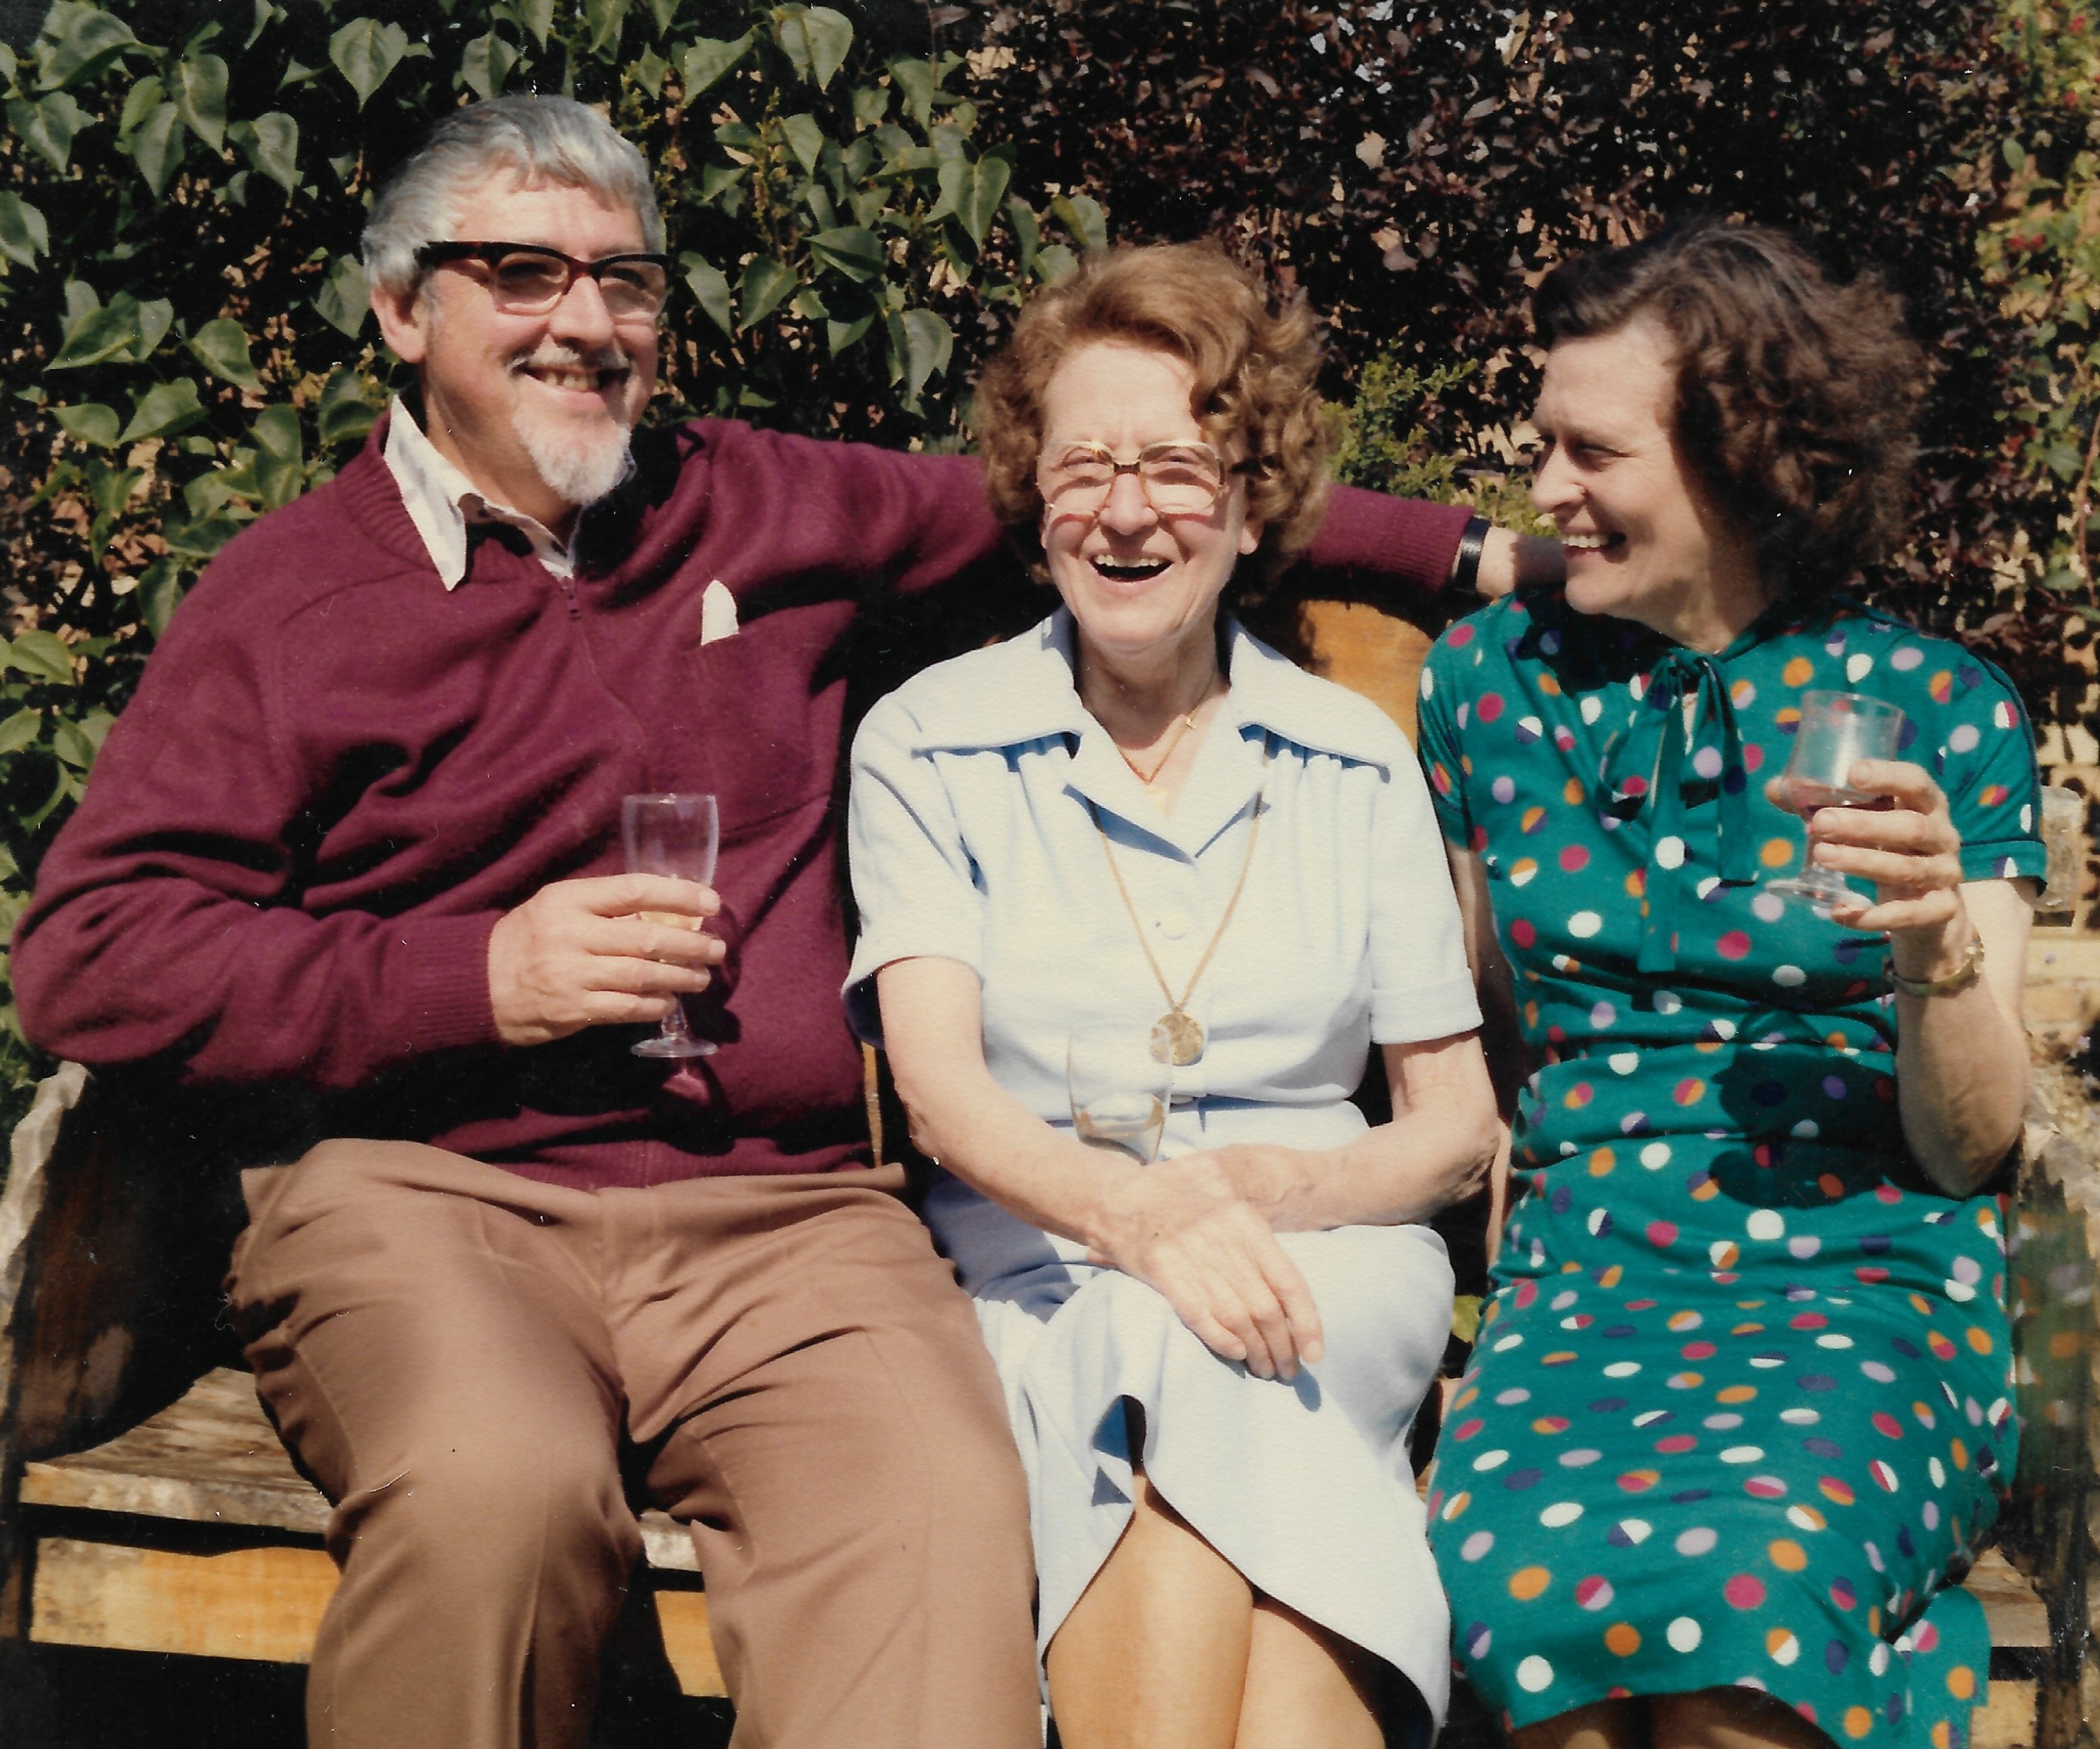 Leonard Salzedo drinking champagne with his mother and wife in the garden